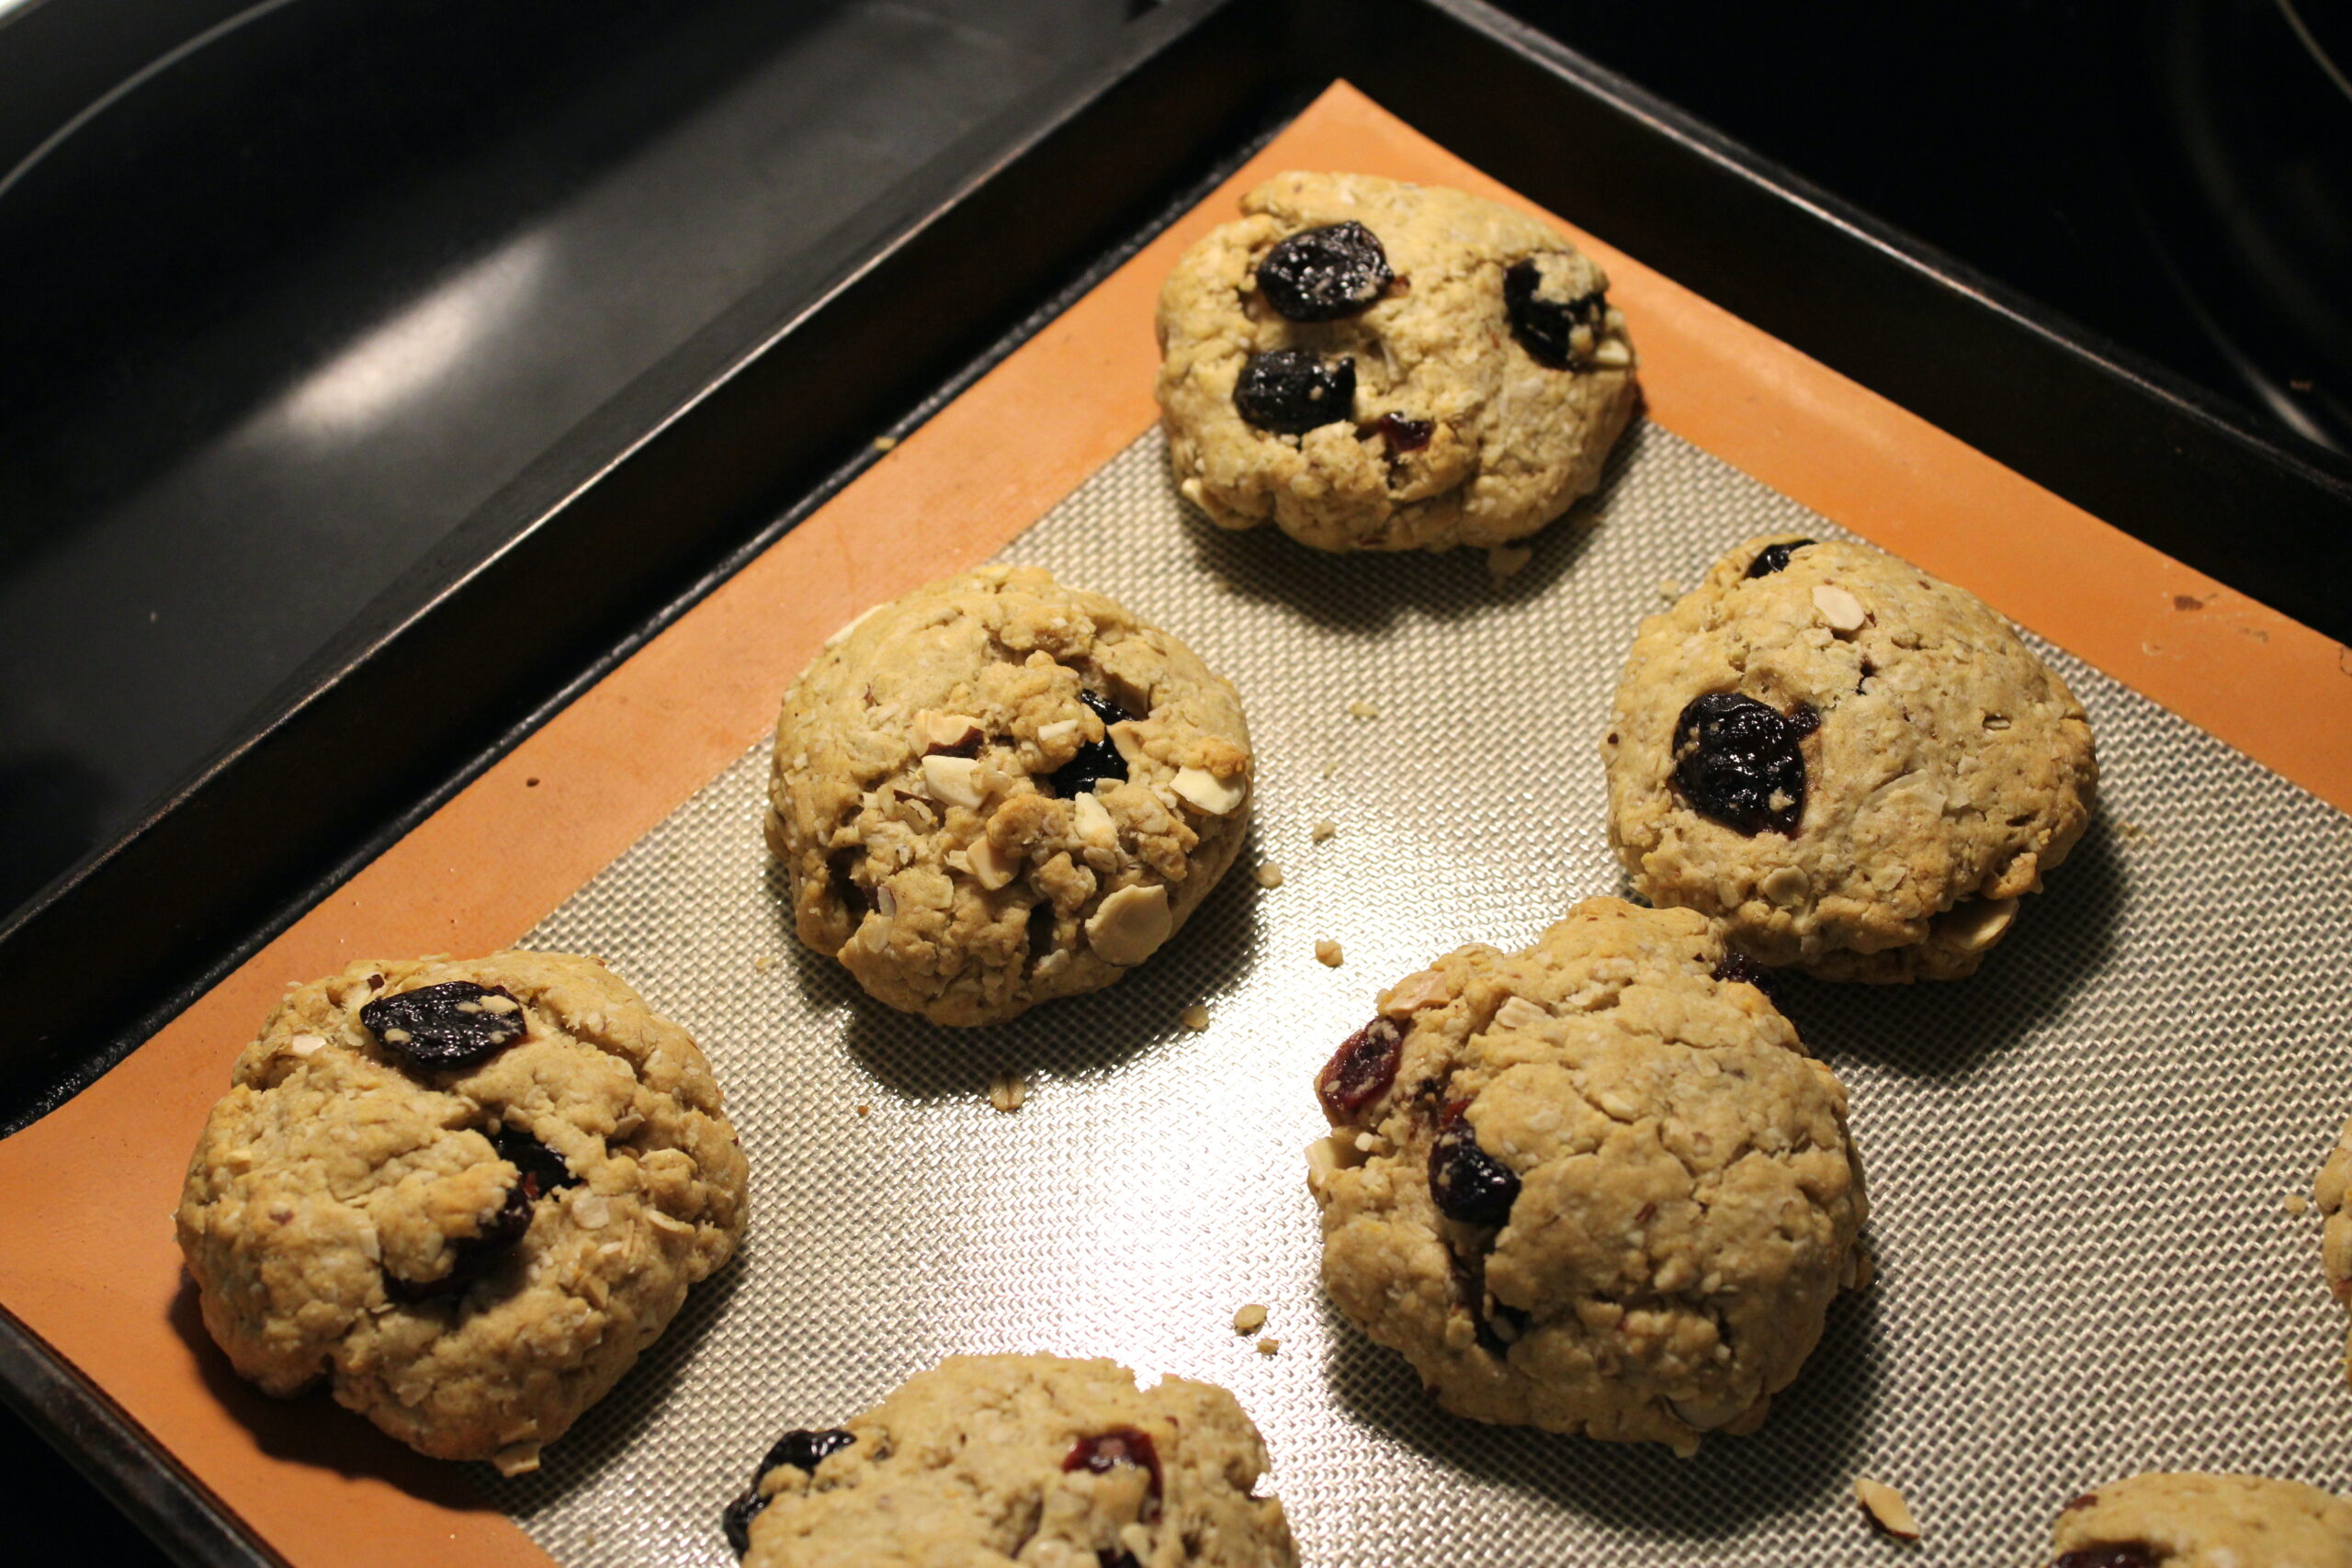 Cranberry Almond Oatmeal Cookies